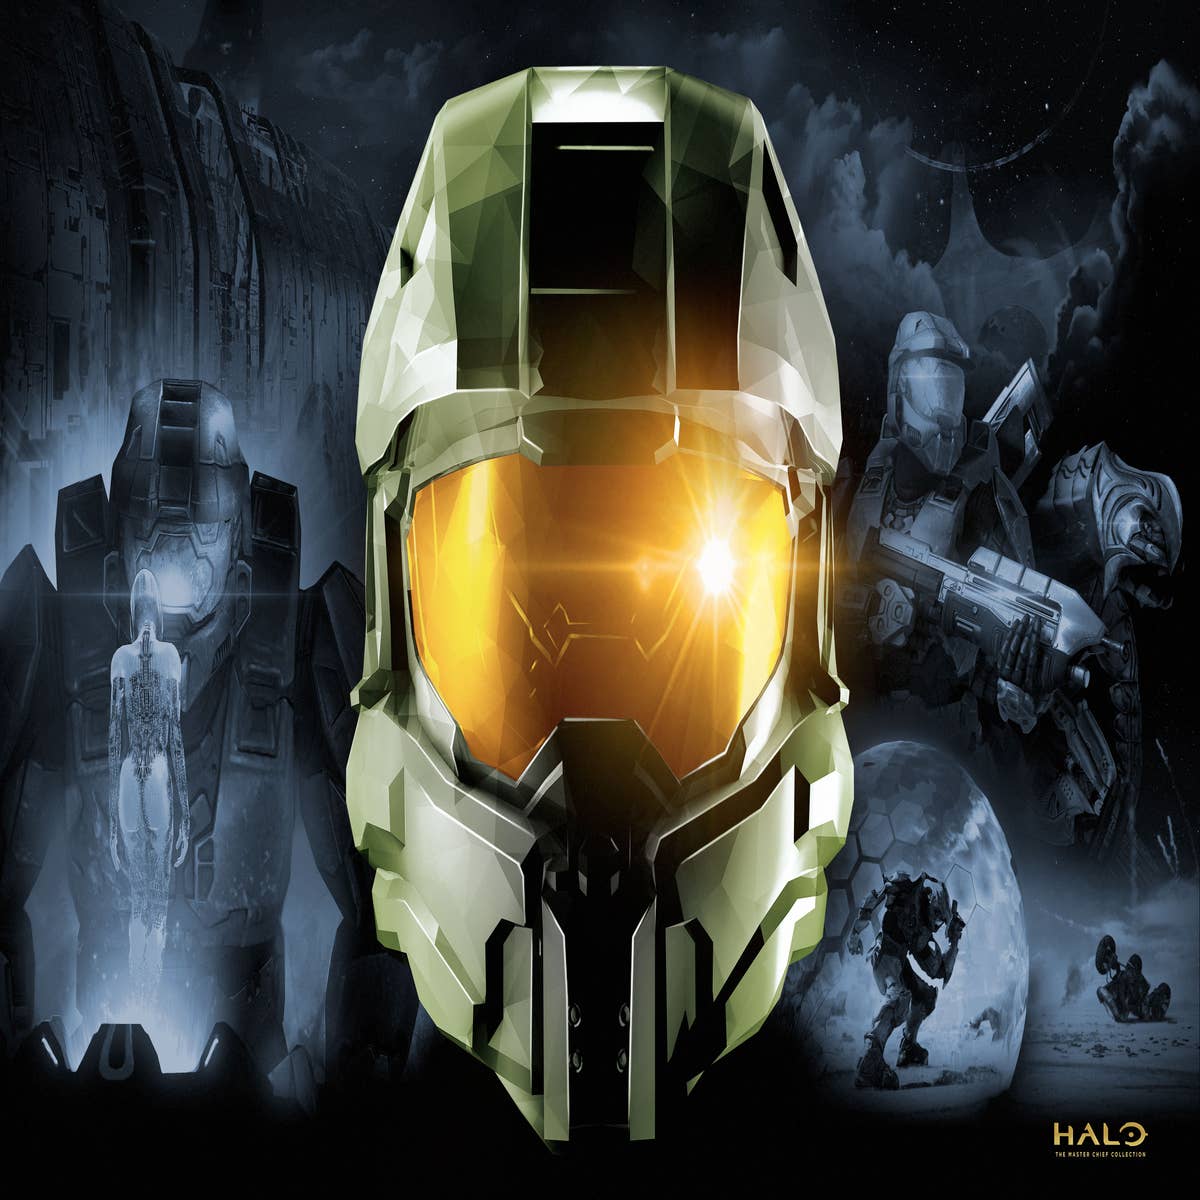 https://assetsio.gnwcdn.com/Halo-The-Master-Chief-Collection.jpg?width=1200&height=1200&fit=bounds&quality=70&format=jpg&auto=webp